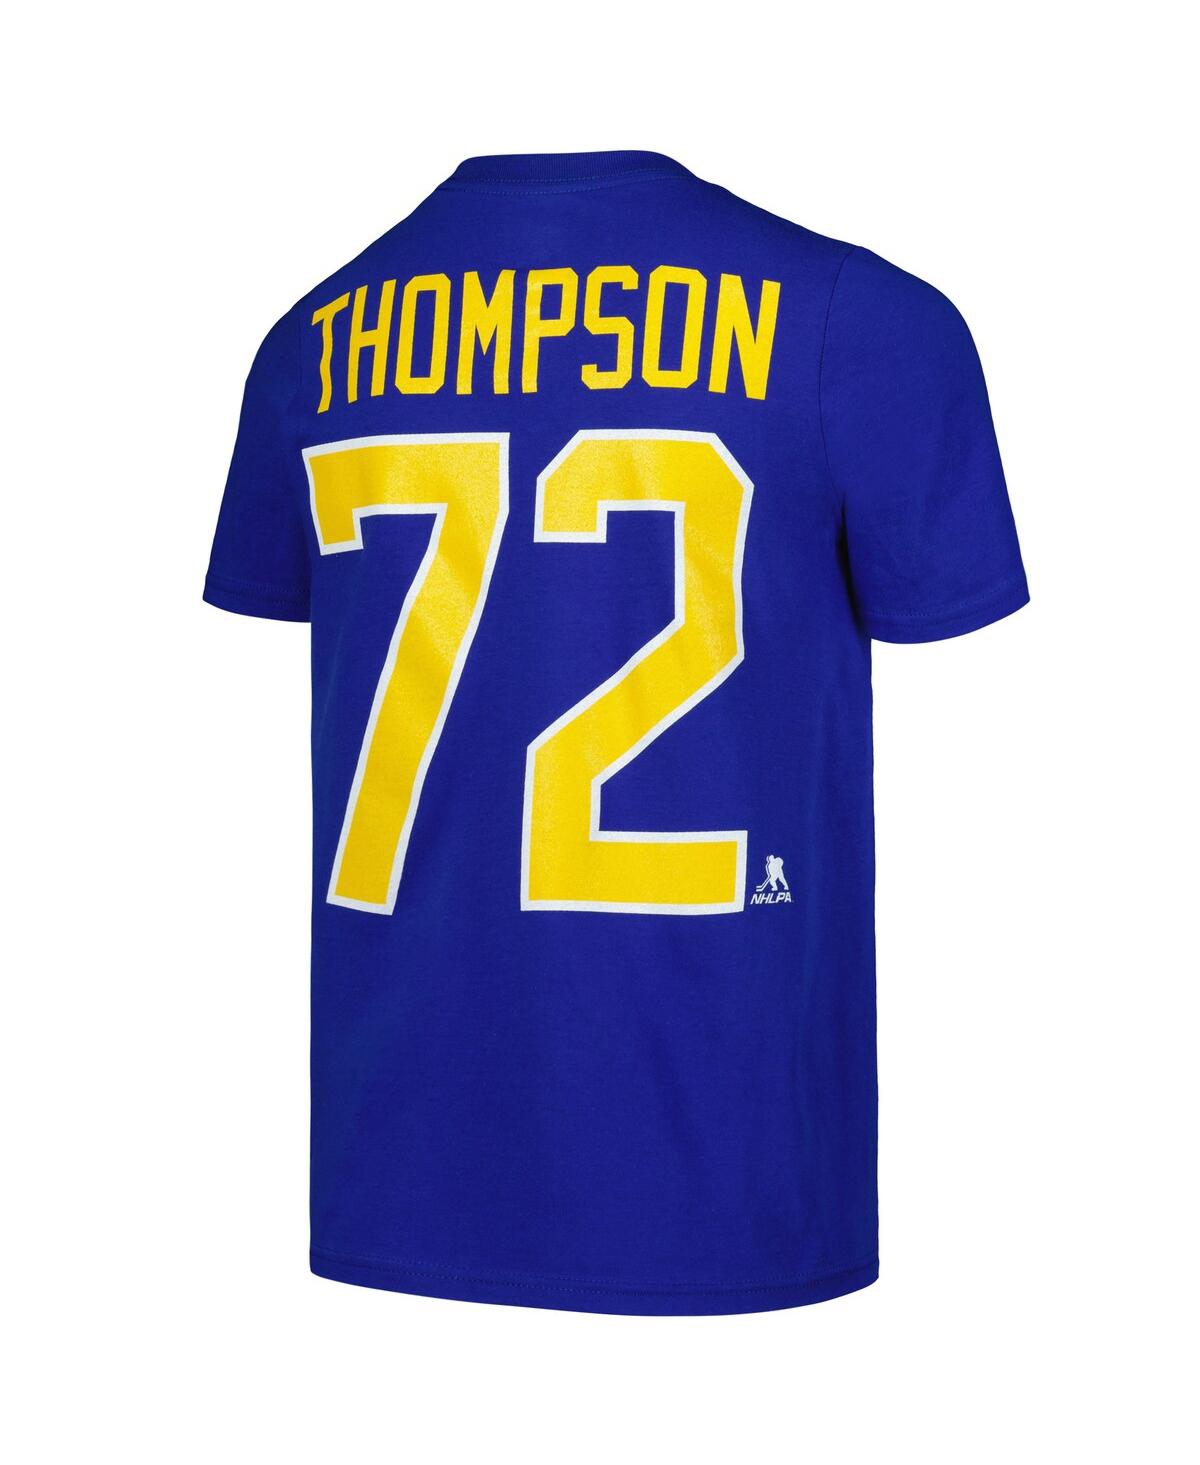 Shop Outerstuff Big Boys Tage Thompson Royal Buffalo Sabres Player Name And Number T-shirt